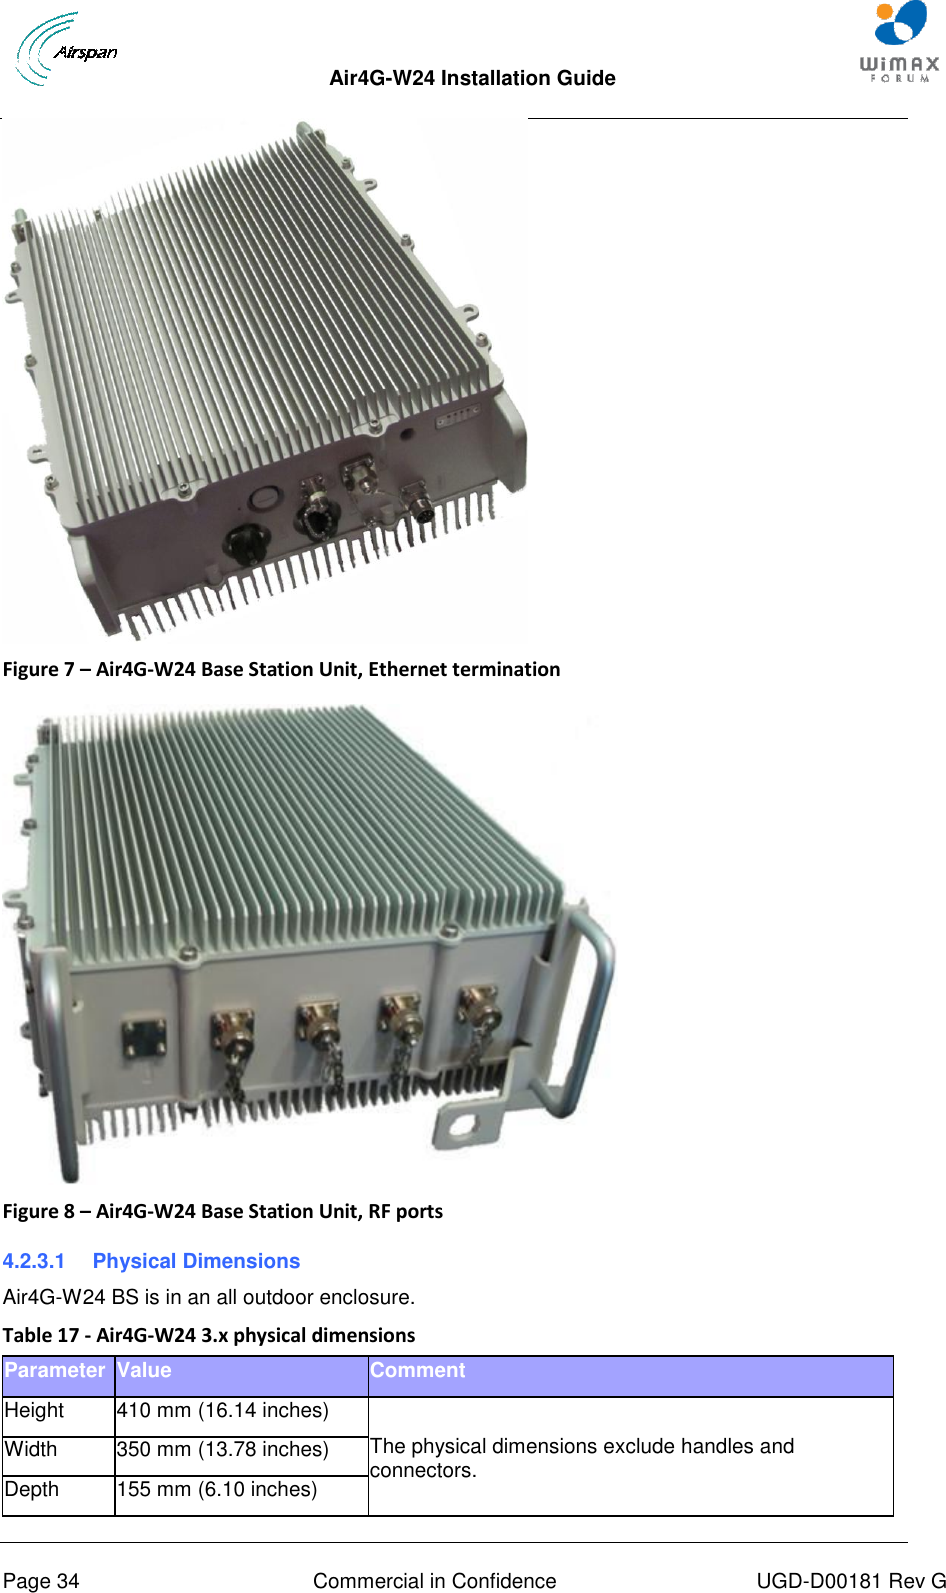  Air4G-W24 Installation Guide     Page 34  Commercial in Confidence  UGD-D00181 Rev G  Figure 7 – Air4G-W24 Base Station Unit, Ethernet termination   Figure 8 – Air4G-W24 Base Station Unit, RF ports 4.2.3.1  Physical Dimensions Air4G-W24 BS is in an all outdoor enclosure. Table 17 - Air4G-W24 3.x physical dimensions Parameter Value Comment Height 410 mm (16.14 inches)  The physical dimensions exclude handles and connectors. Width 350 mm (13.78 inches) Depth 155 mm (6.10 inches) 